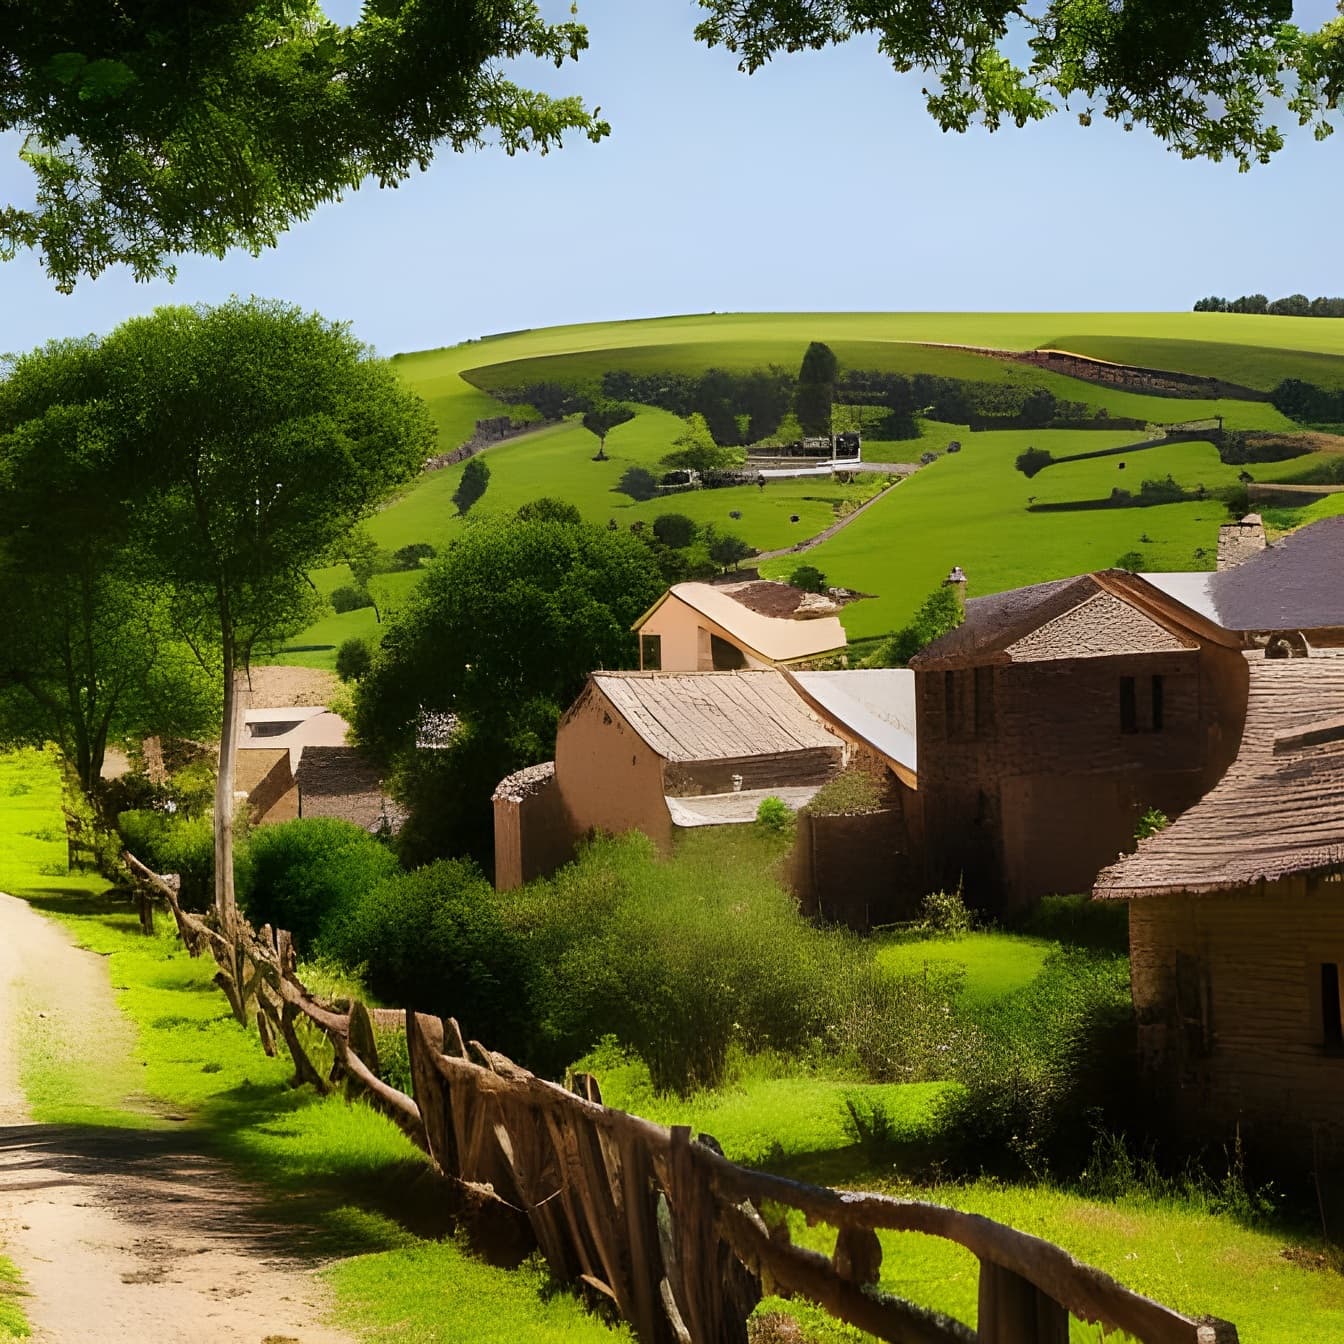 Small rural village in a beautiful countryside landscape – AI art